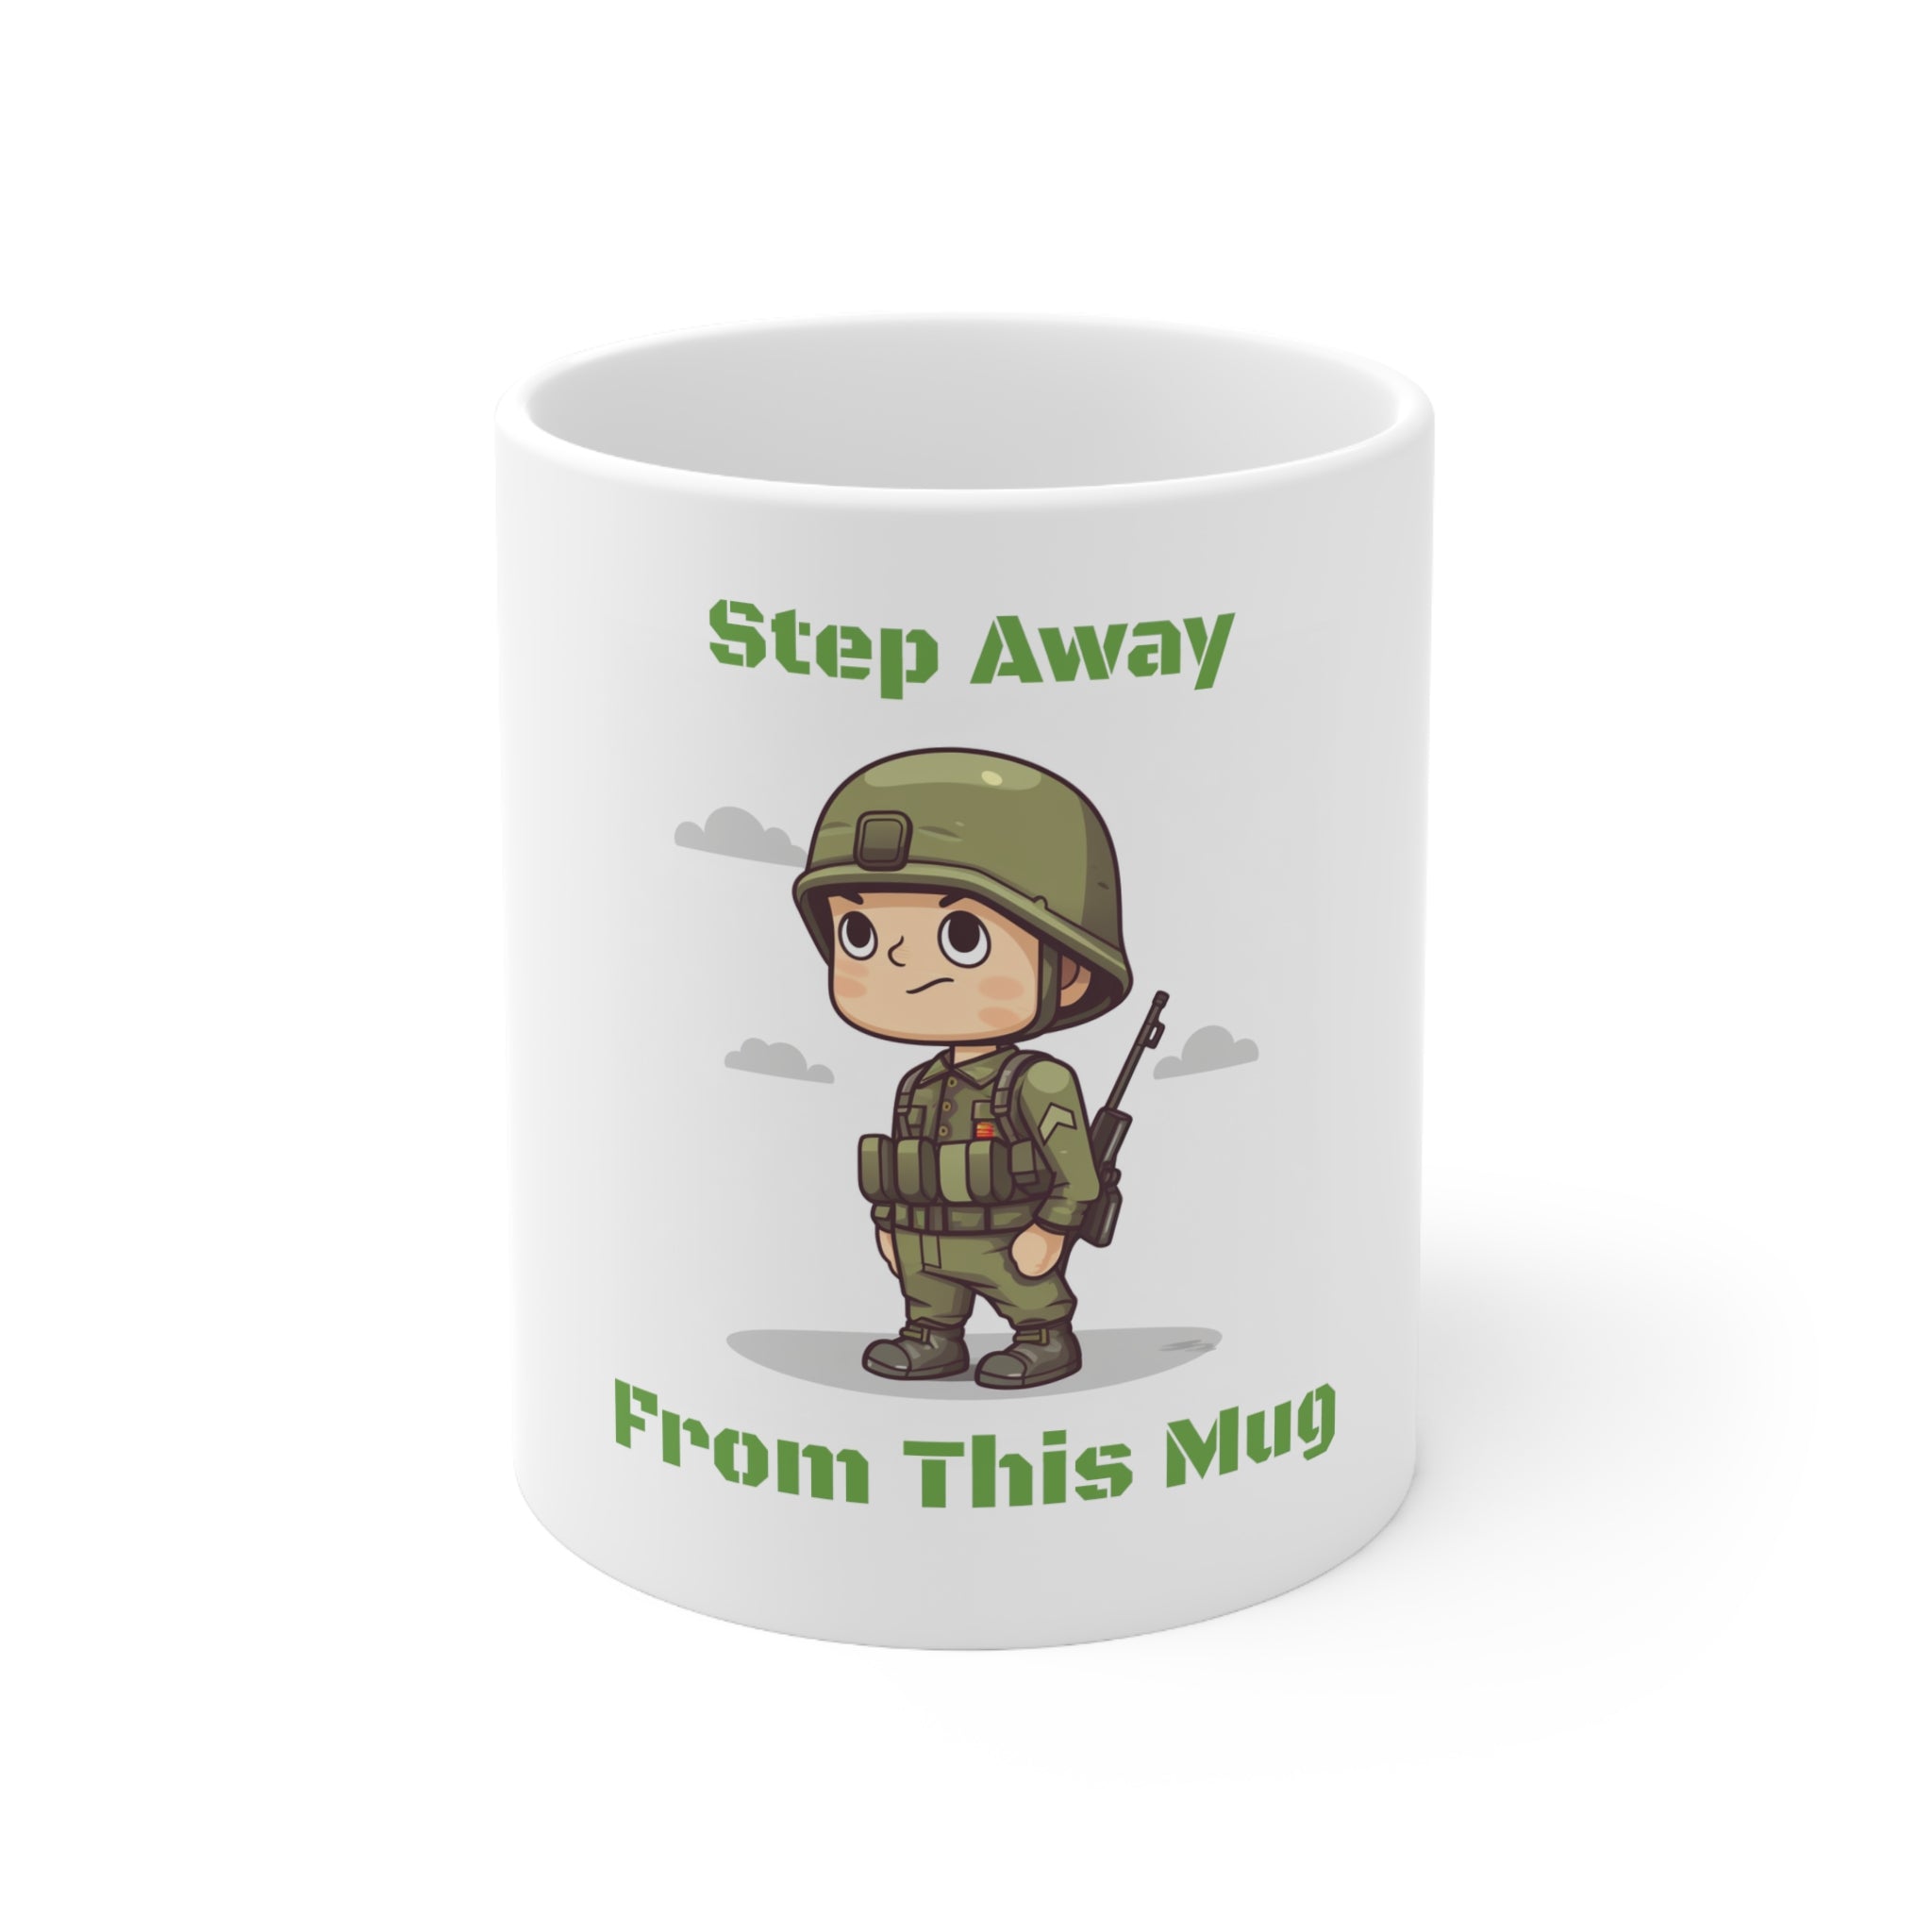 Playful Command - Miniature Army Private Ceramic Mug - Humorous Coffee Cup - 11oz Novelty Gift Humorous Ceramic Gift